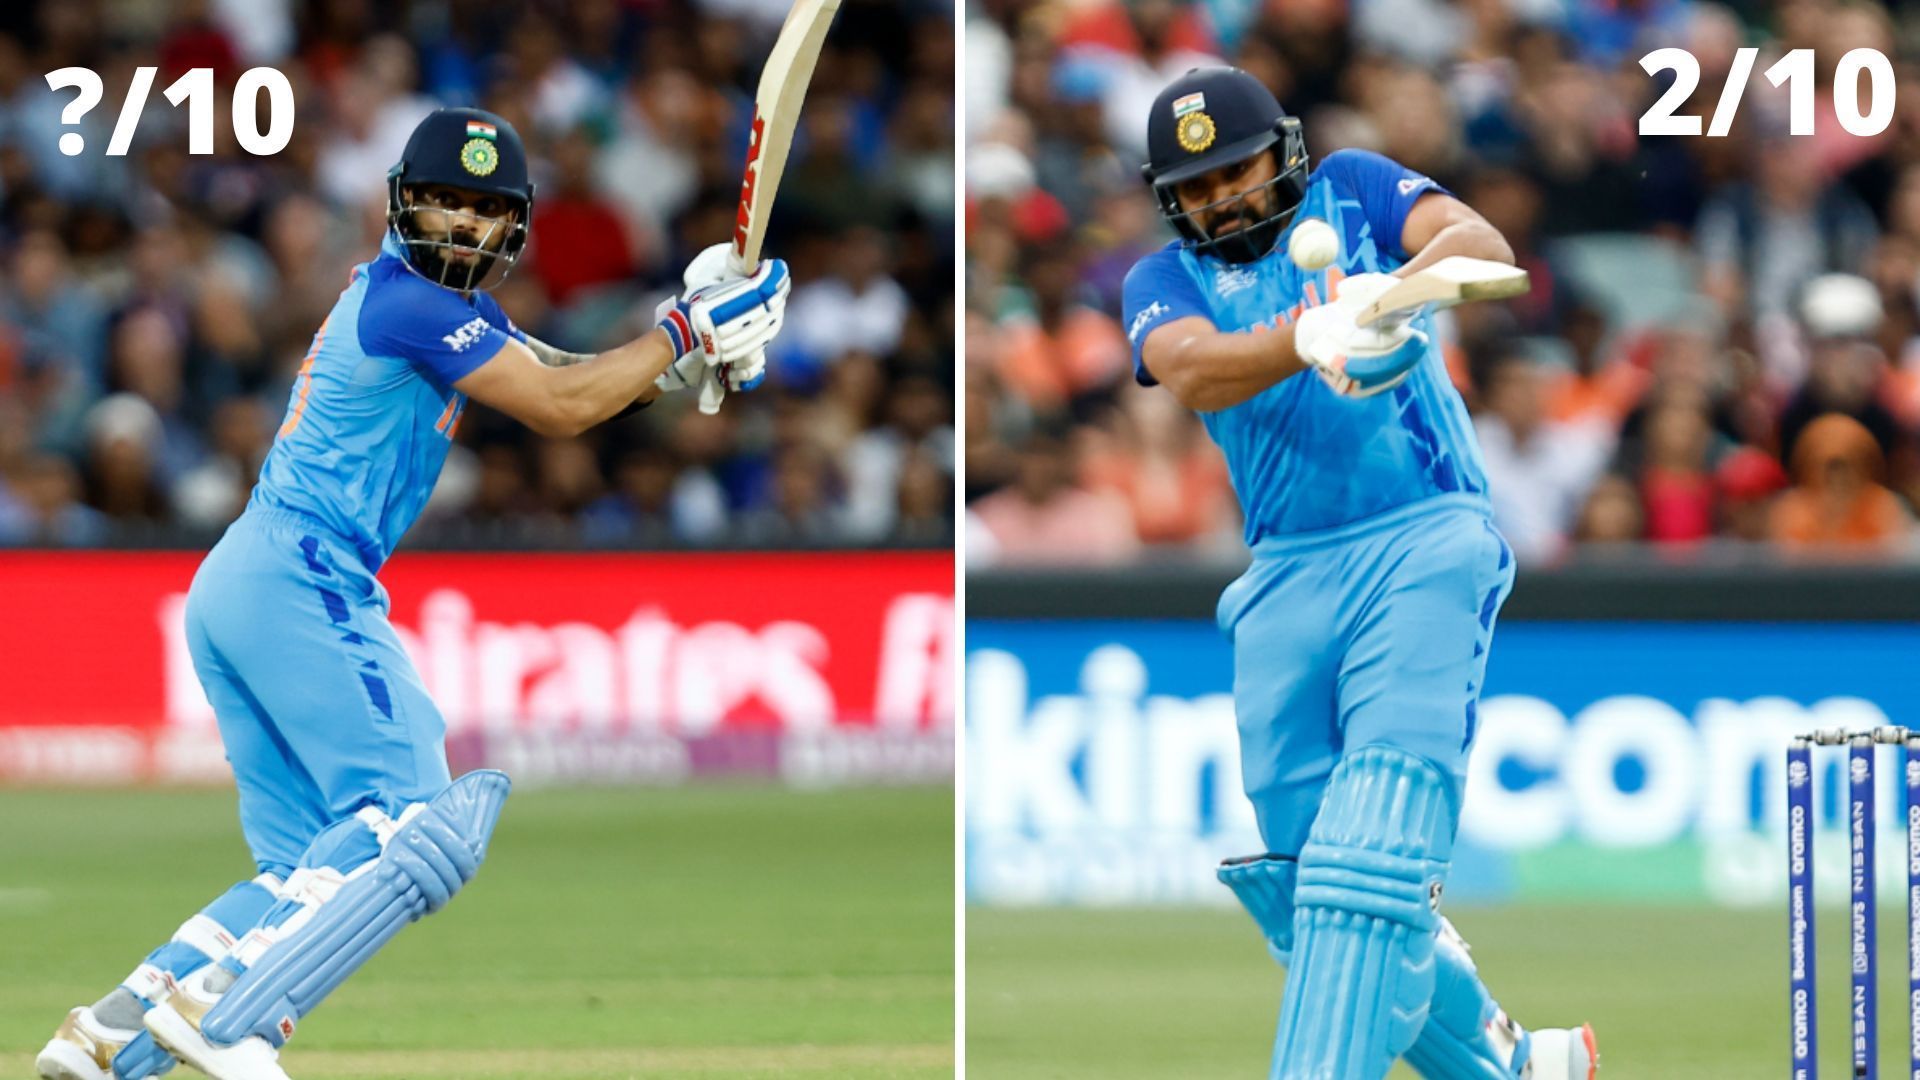 Rohit Sharma struggled for timing in the semi-final